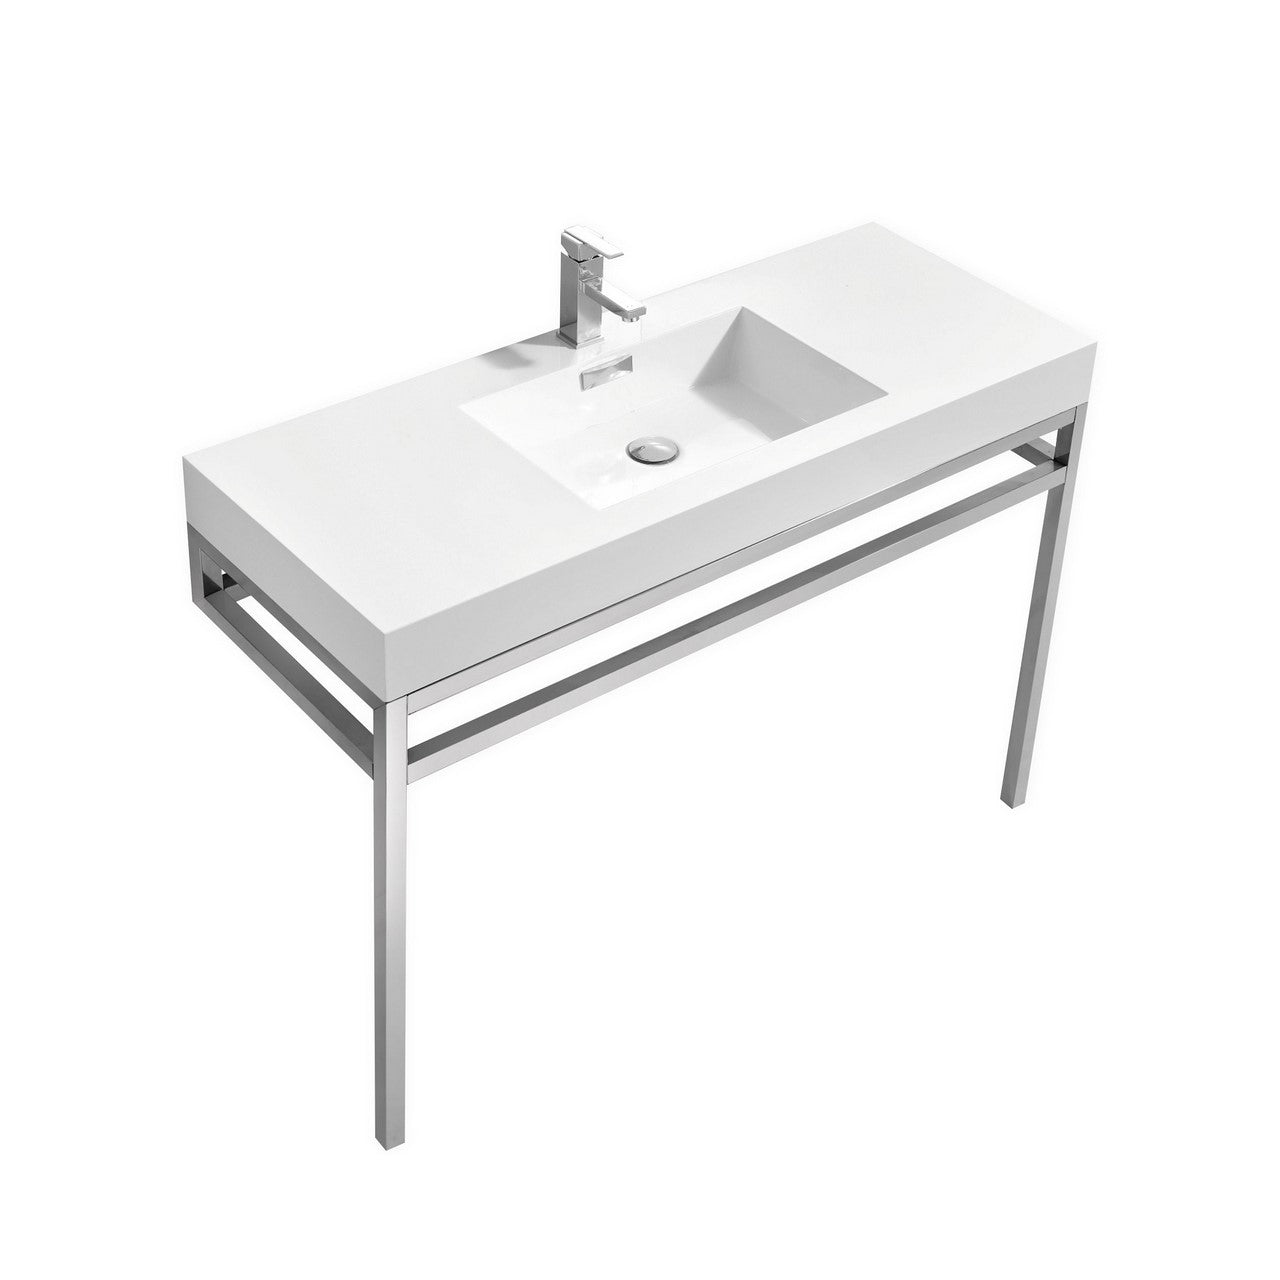 KUBEBATH Haus CH48 48" Single Bathroom Vanity in Chrome with White Acrylic Composite, Integrated Sink, Angled View